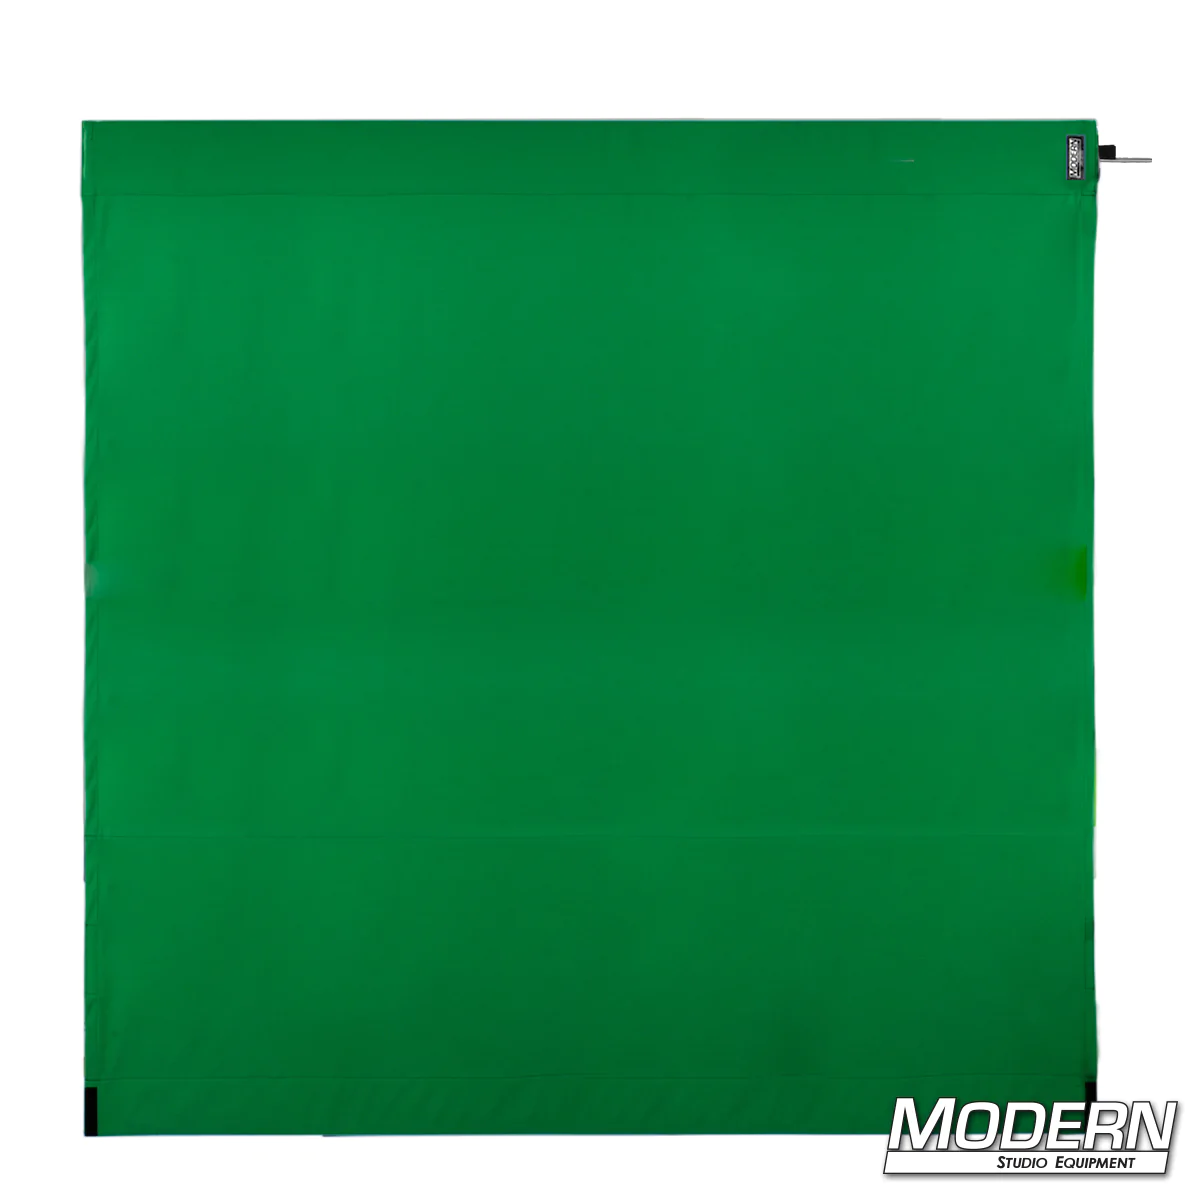 8' Wag Flag with Stainless Frame - Chromakey Green